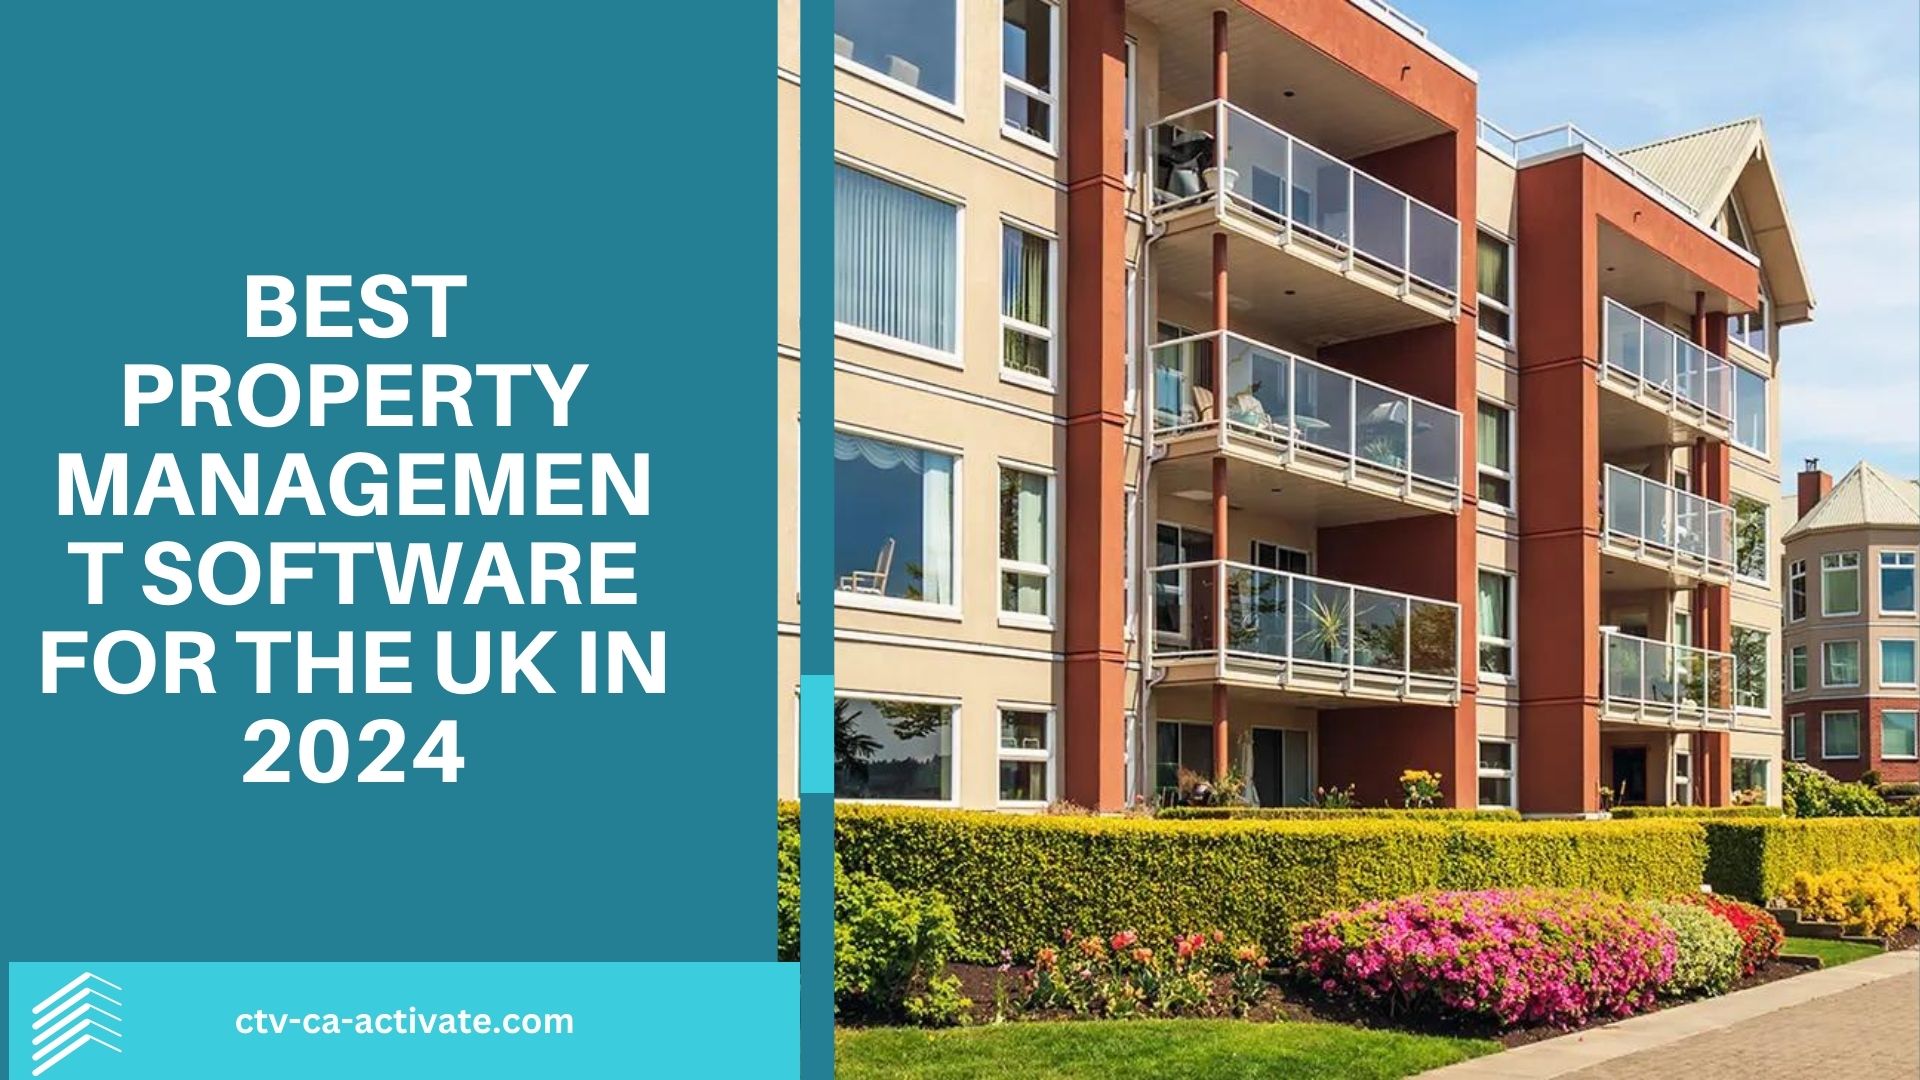 Best Property Management Software for the UK in 2024